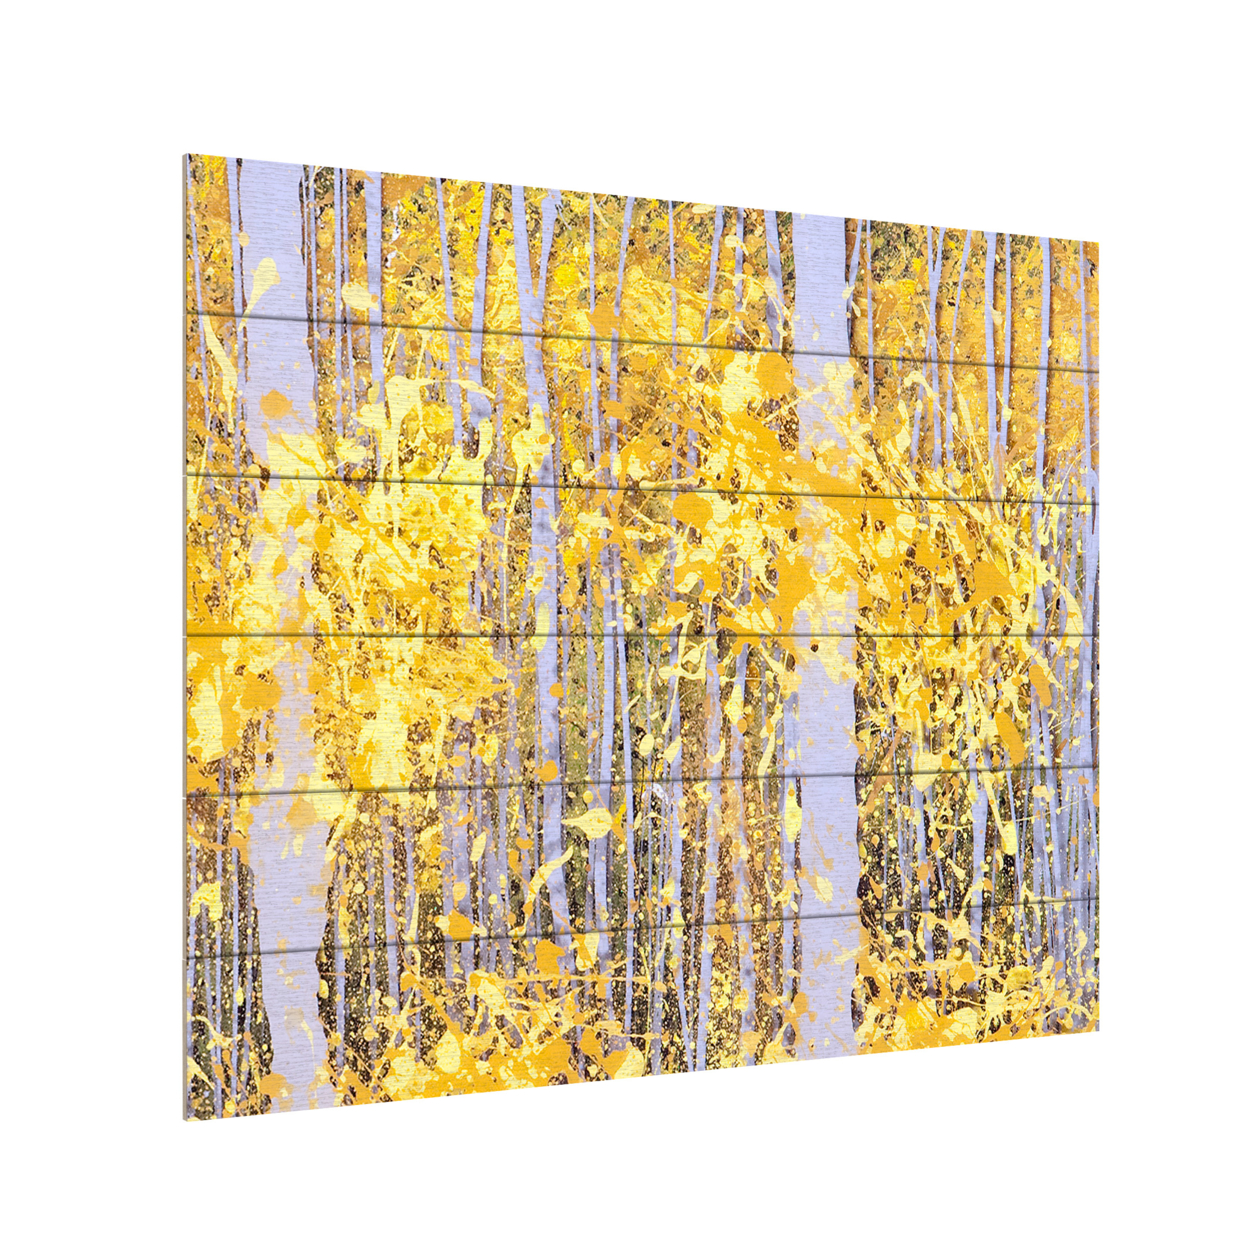 Wooden Slat Art 18 X 22 Inches Titled PanorAspens Grey Forest Ready To Hang Home Decor Picture